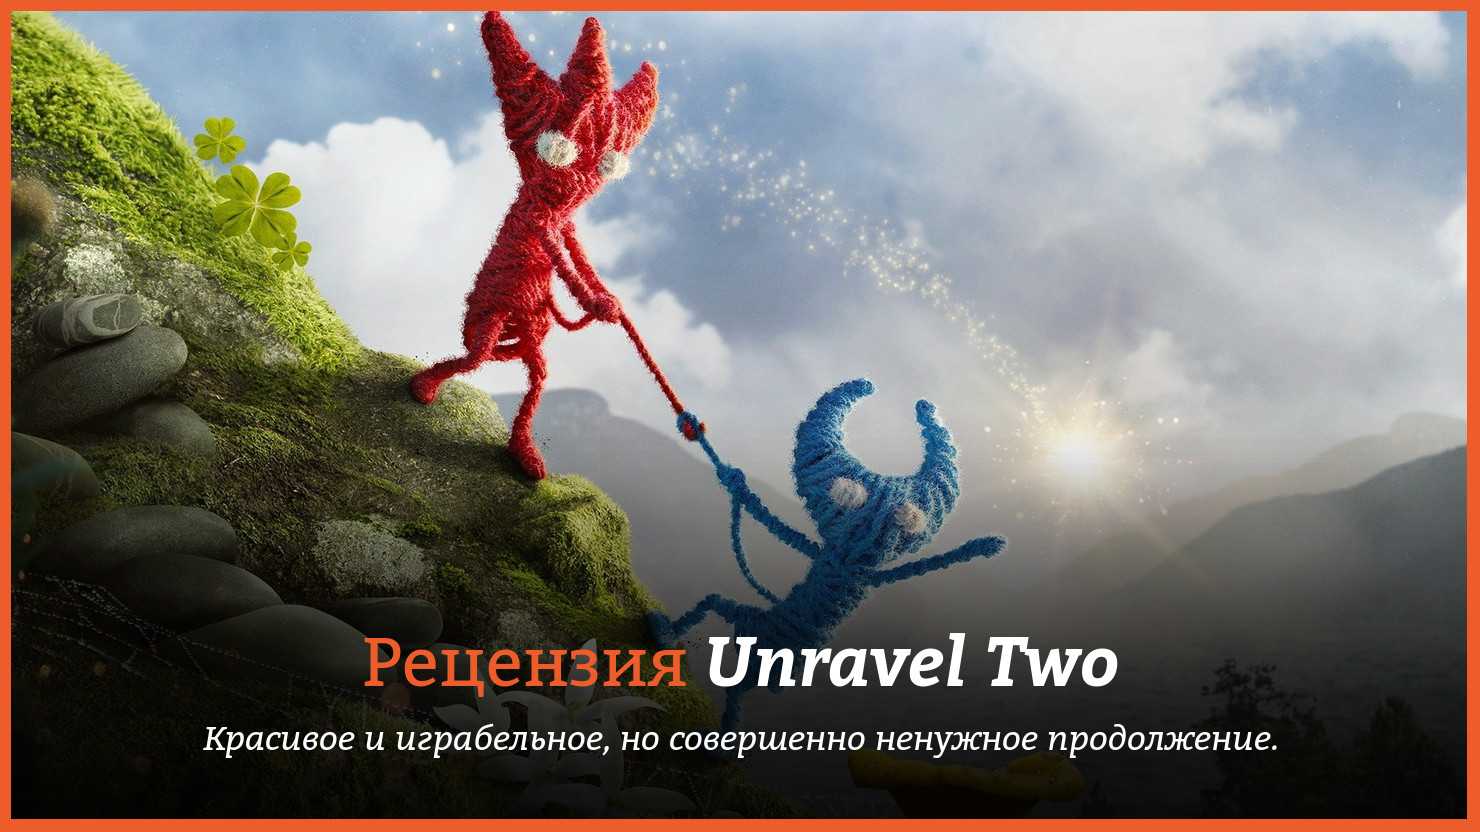 Unravel two русский язык. Unravel two обзор. Постер Unravel two Unravel two. Unravel отзывы.